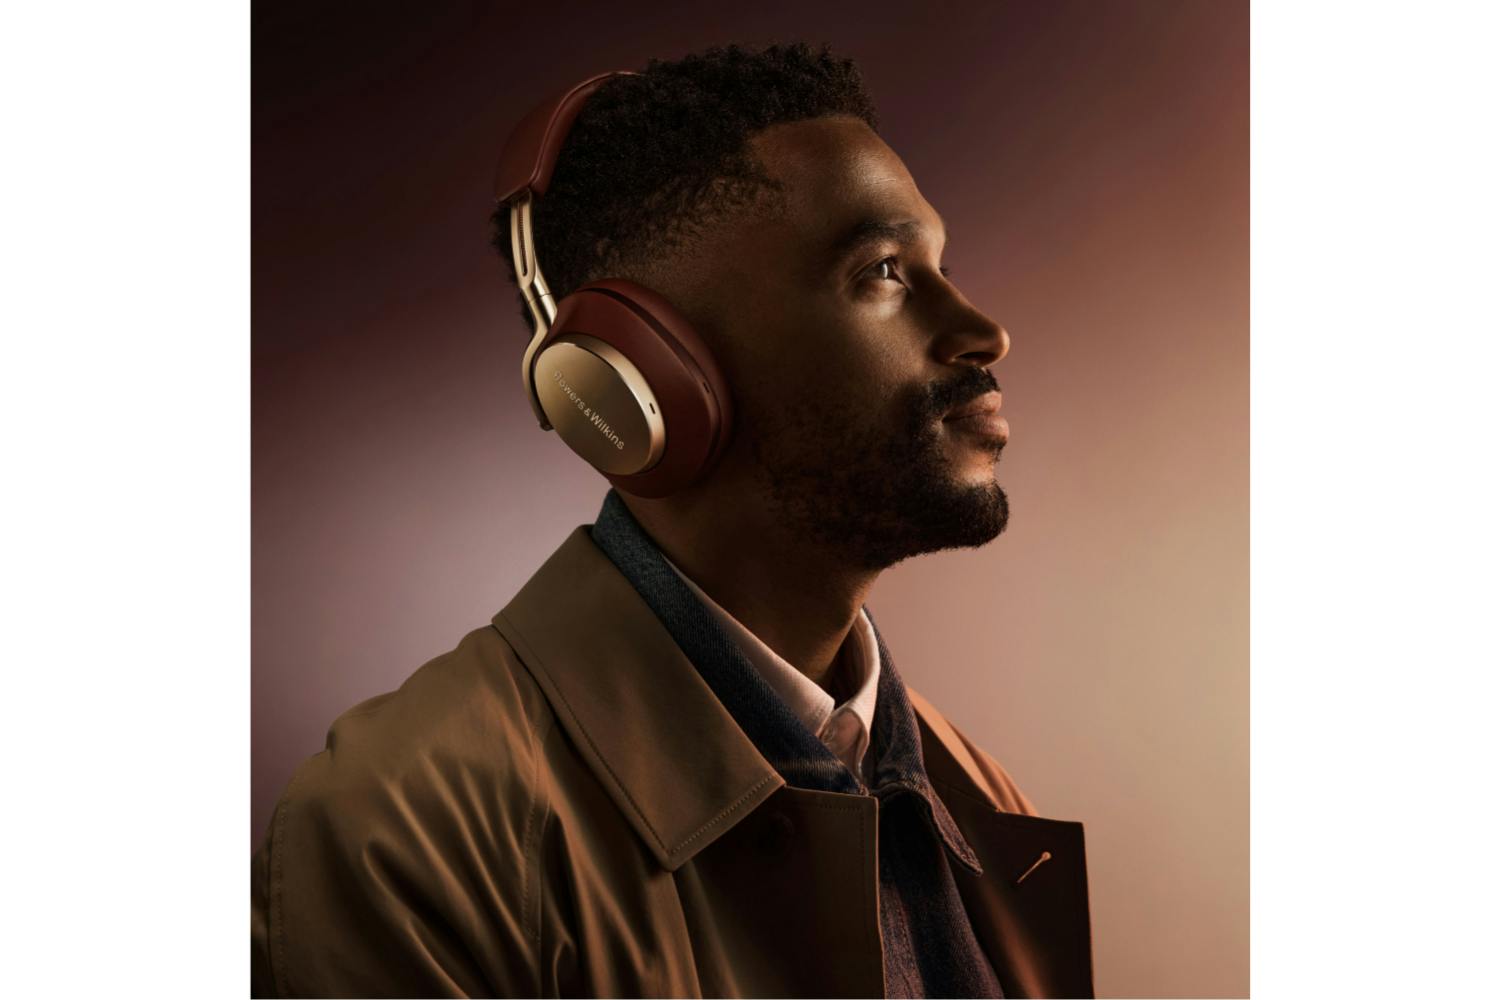 Bowers & Wilkins Px8 Over-Ear Noise Canceling Wireless Headphones | Royal Burgundy